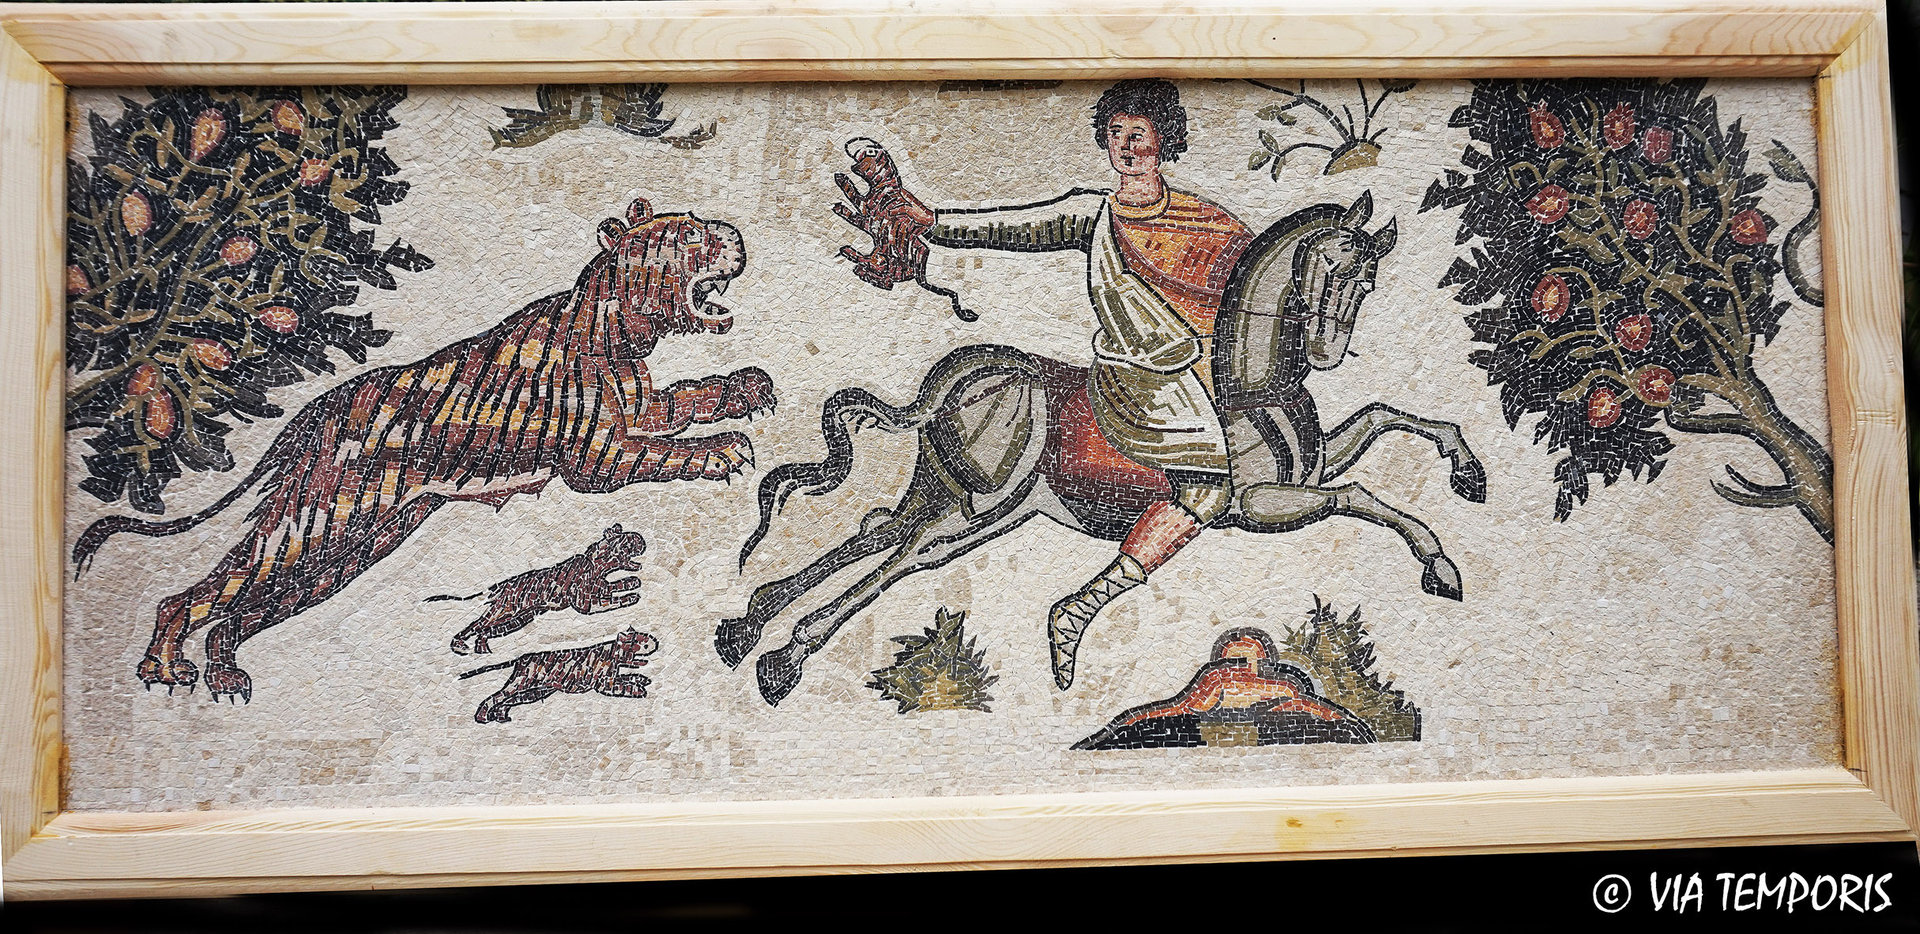 ROMAN MOSAIC - RIDER KIDNAPING A LITTLE TIGER - WORCESTER HUNT MUSEUM